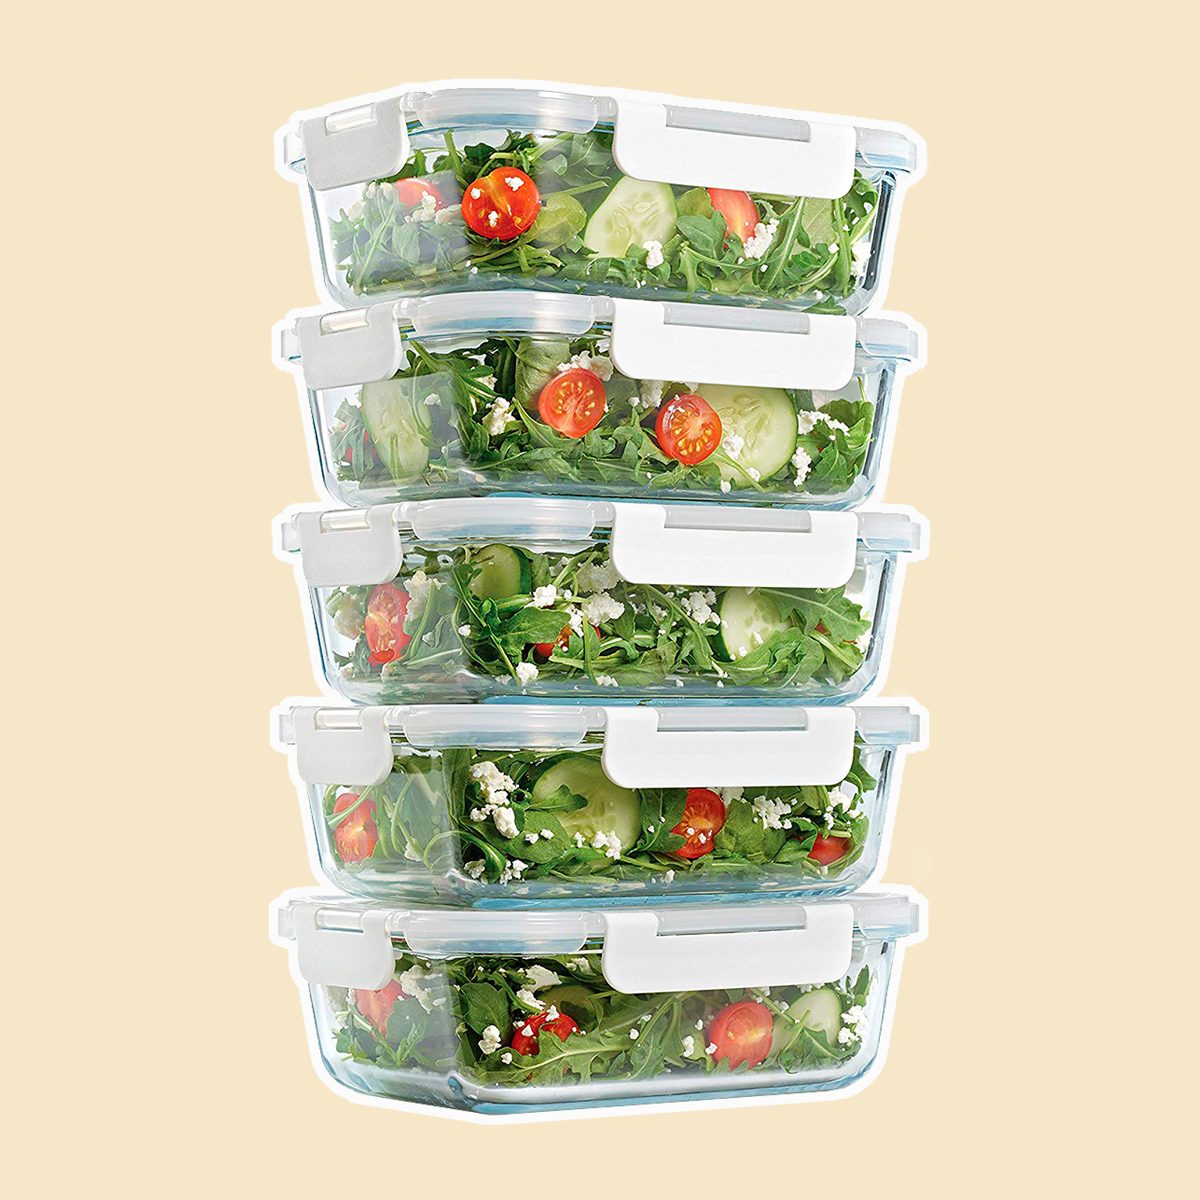 Crofton Prep & Go Glass Jar NEW Lunch Salad Dressing Container Meal Prep  Liter